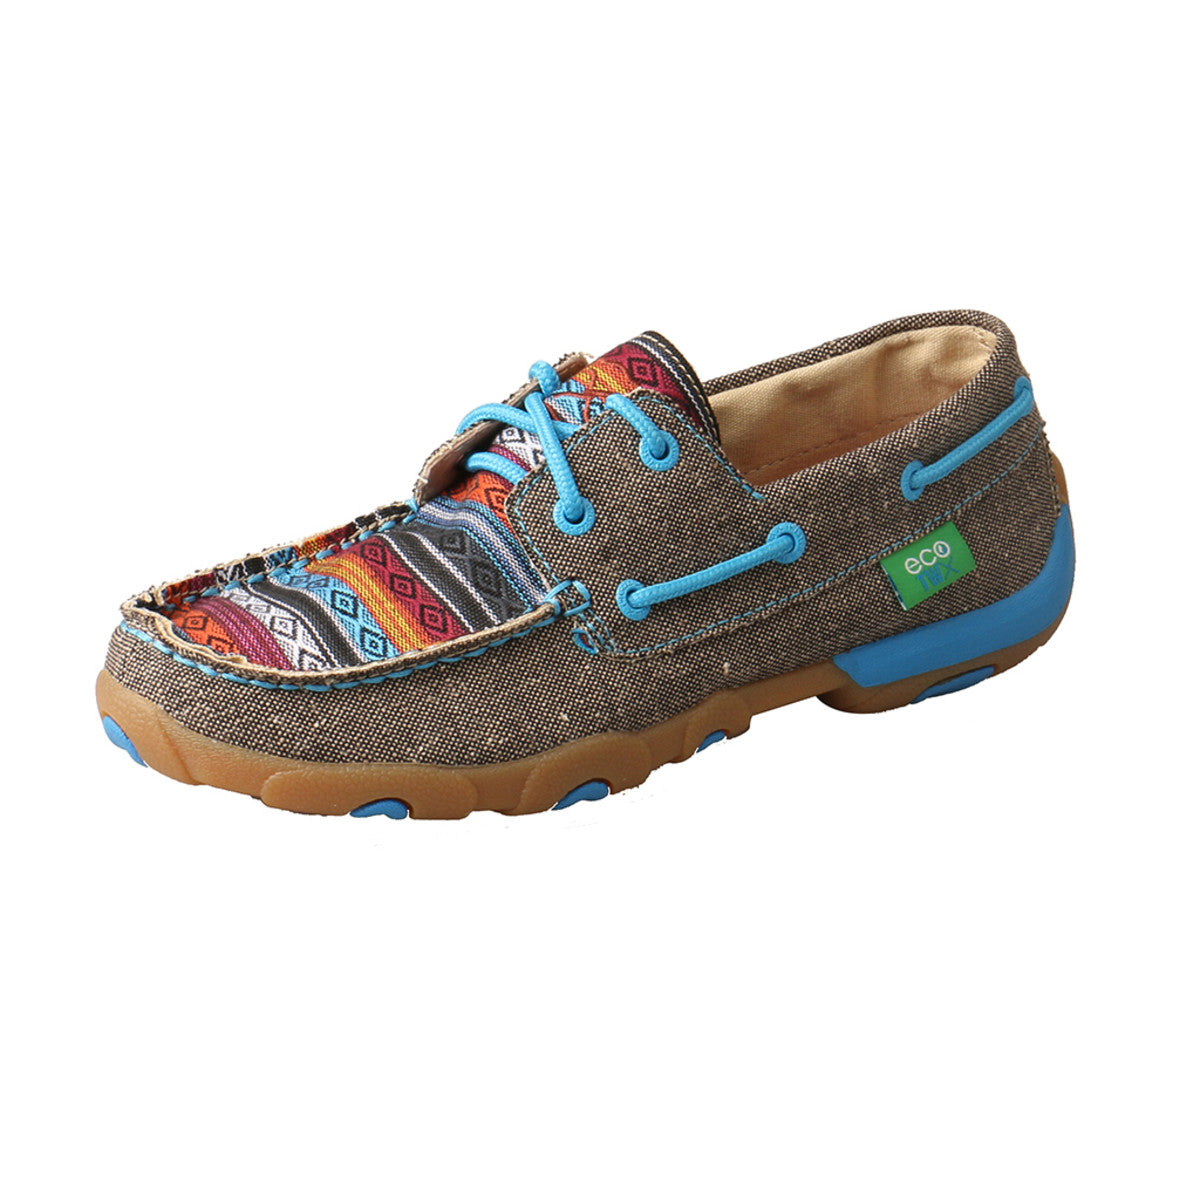 Women's Twisted X Boat Shoe Driving Moccasins in Dust & Multi from the side view